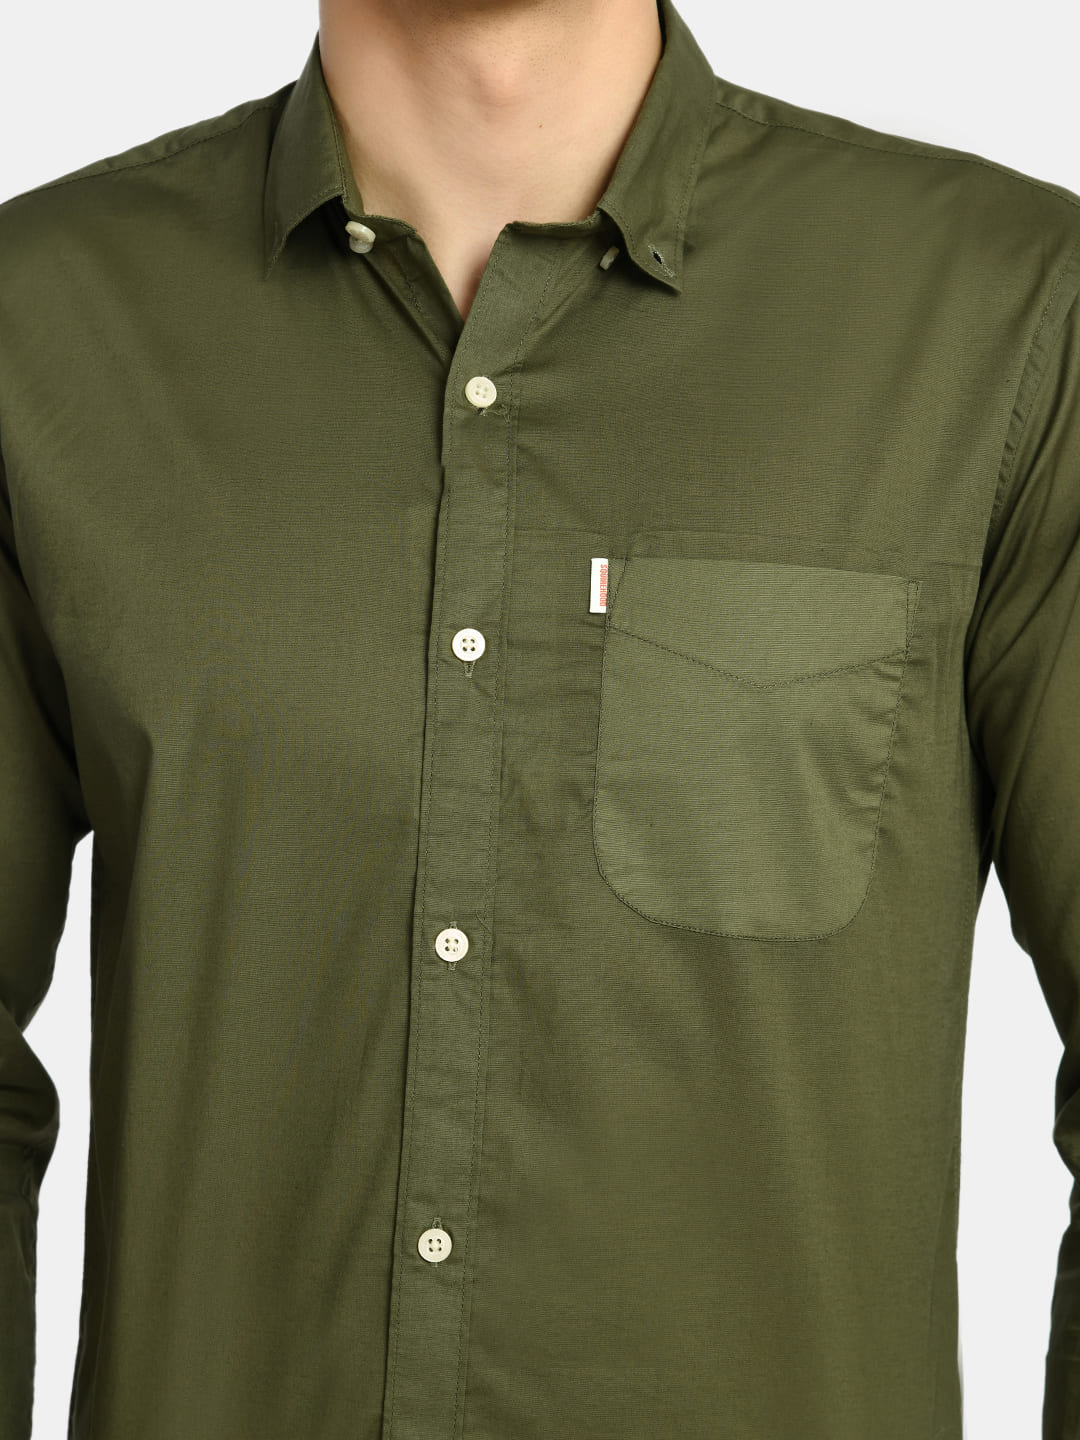 Men's Olive Green Solid Cotton Casual Shirt